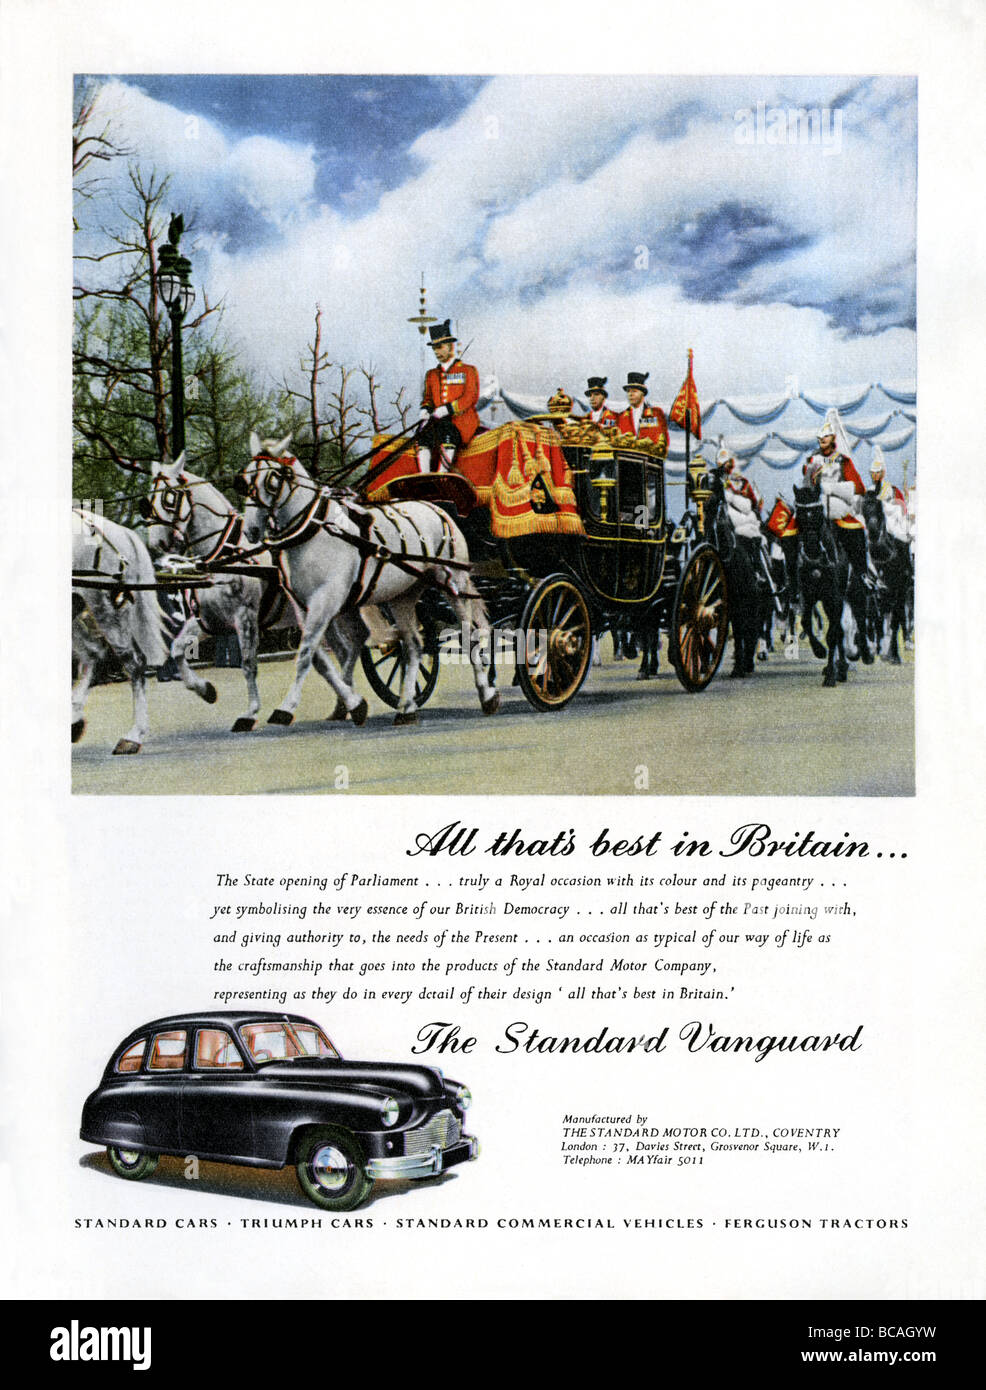 1951 colour advertisement for the Standard Vanguard car featuring an illustration of the State opening of Parliament Stock Photo